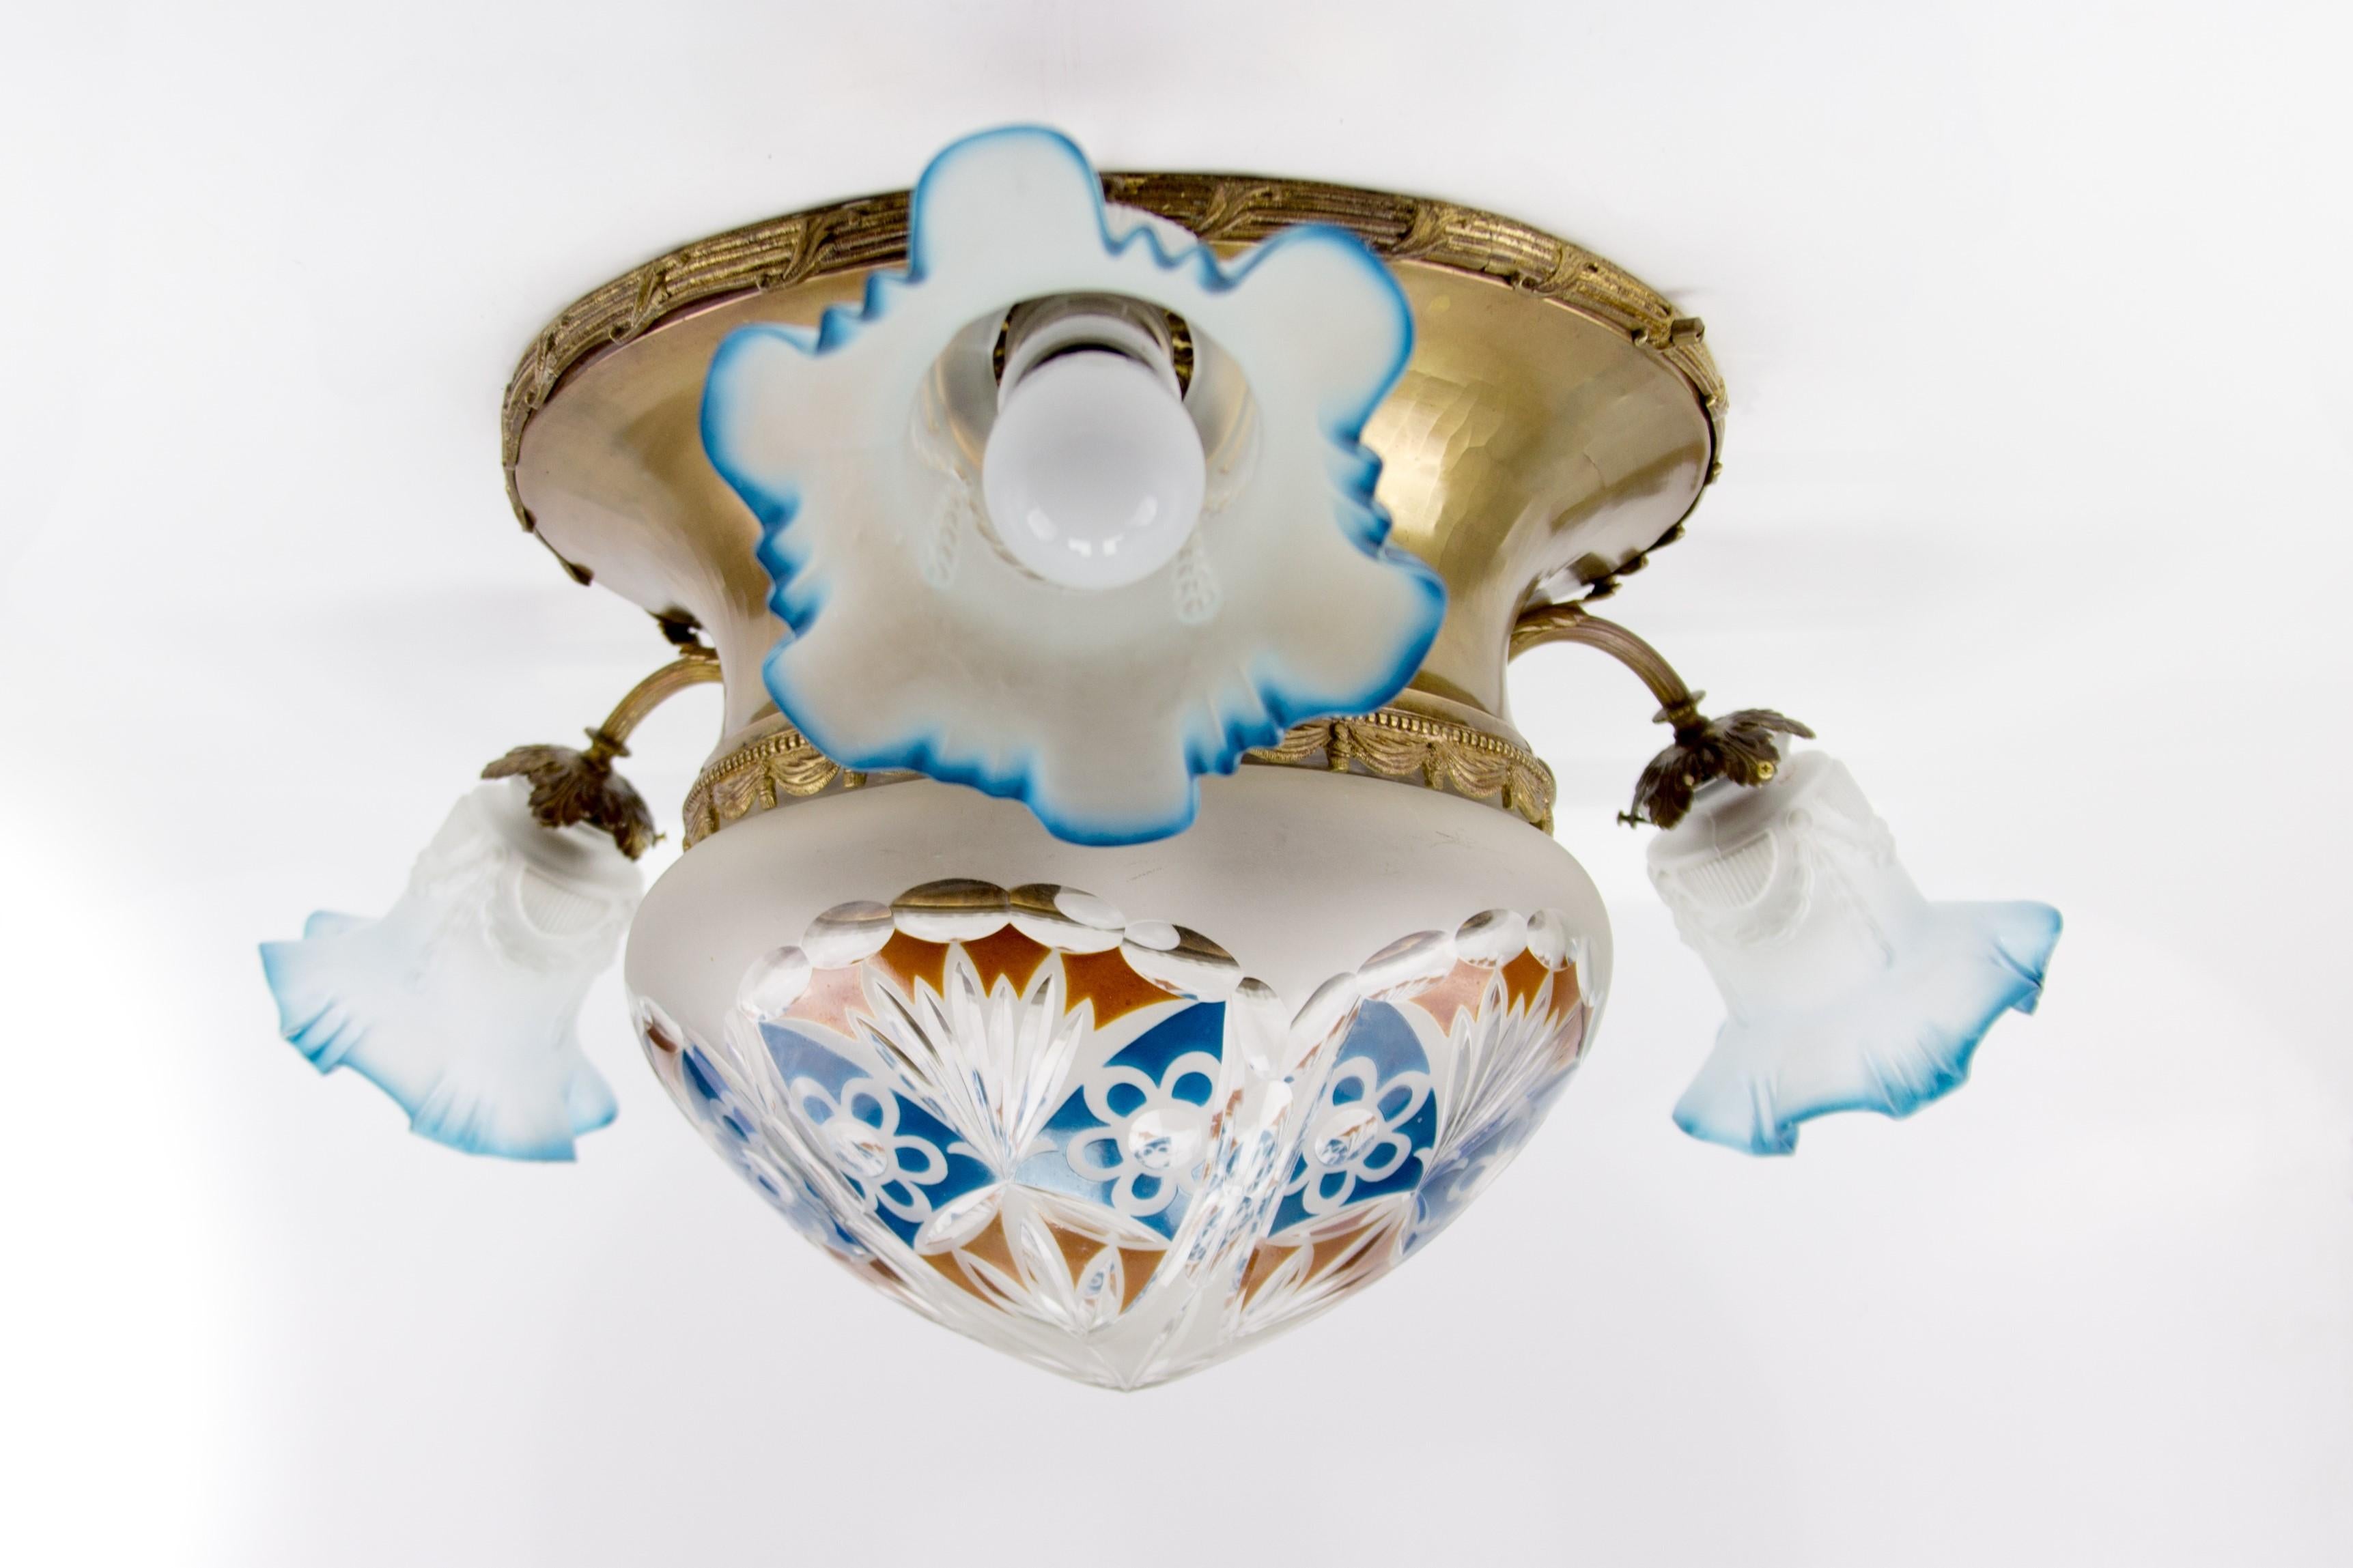 A wonderful Art Nouveau style brass and glass flush mount four-light fixture/ceiling lamp from the 1930s. With frosted white, blue, and red cut-glass central bowl/glass shade and three frosted glass lampshades with a blue edge. The ceiling lamp has